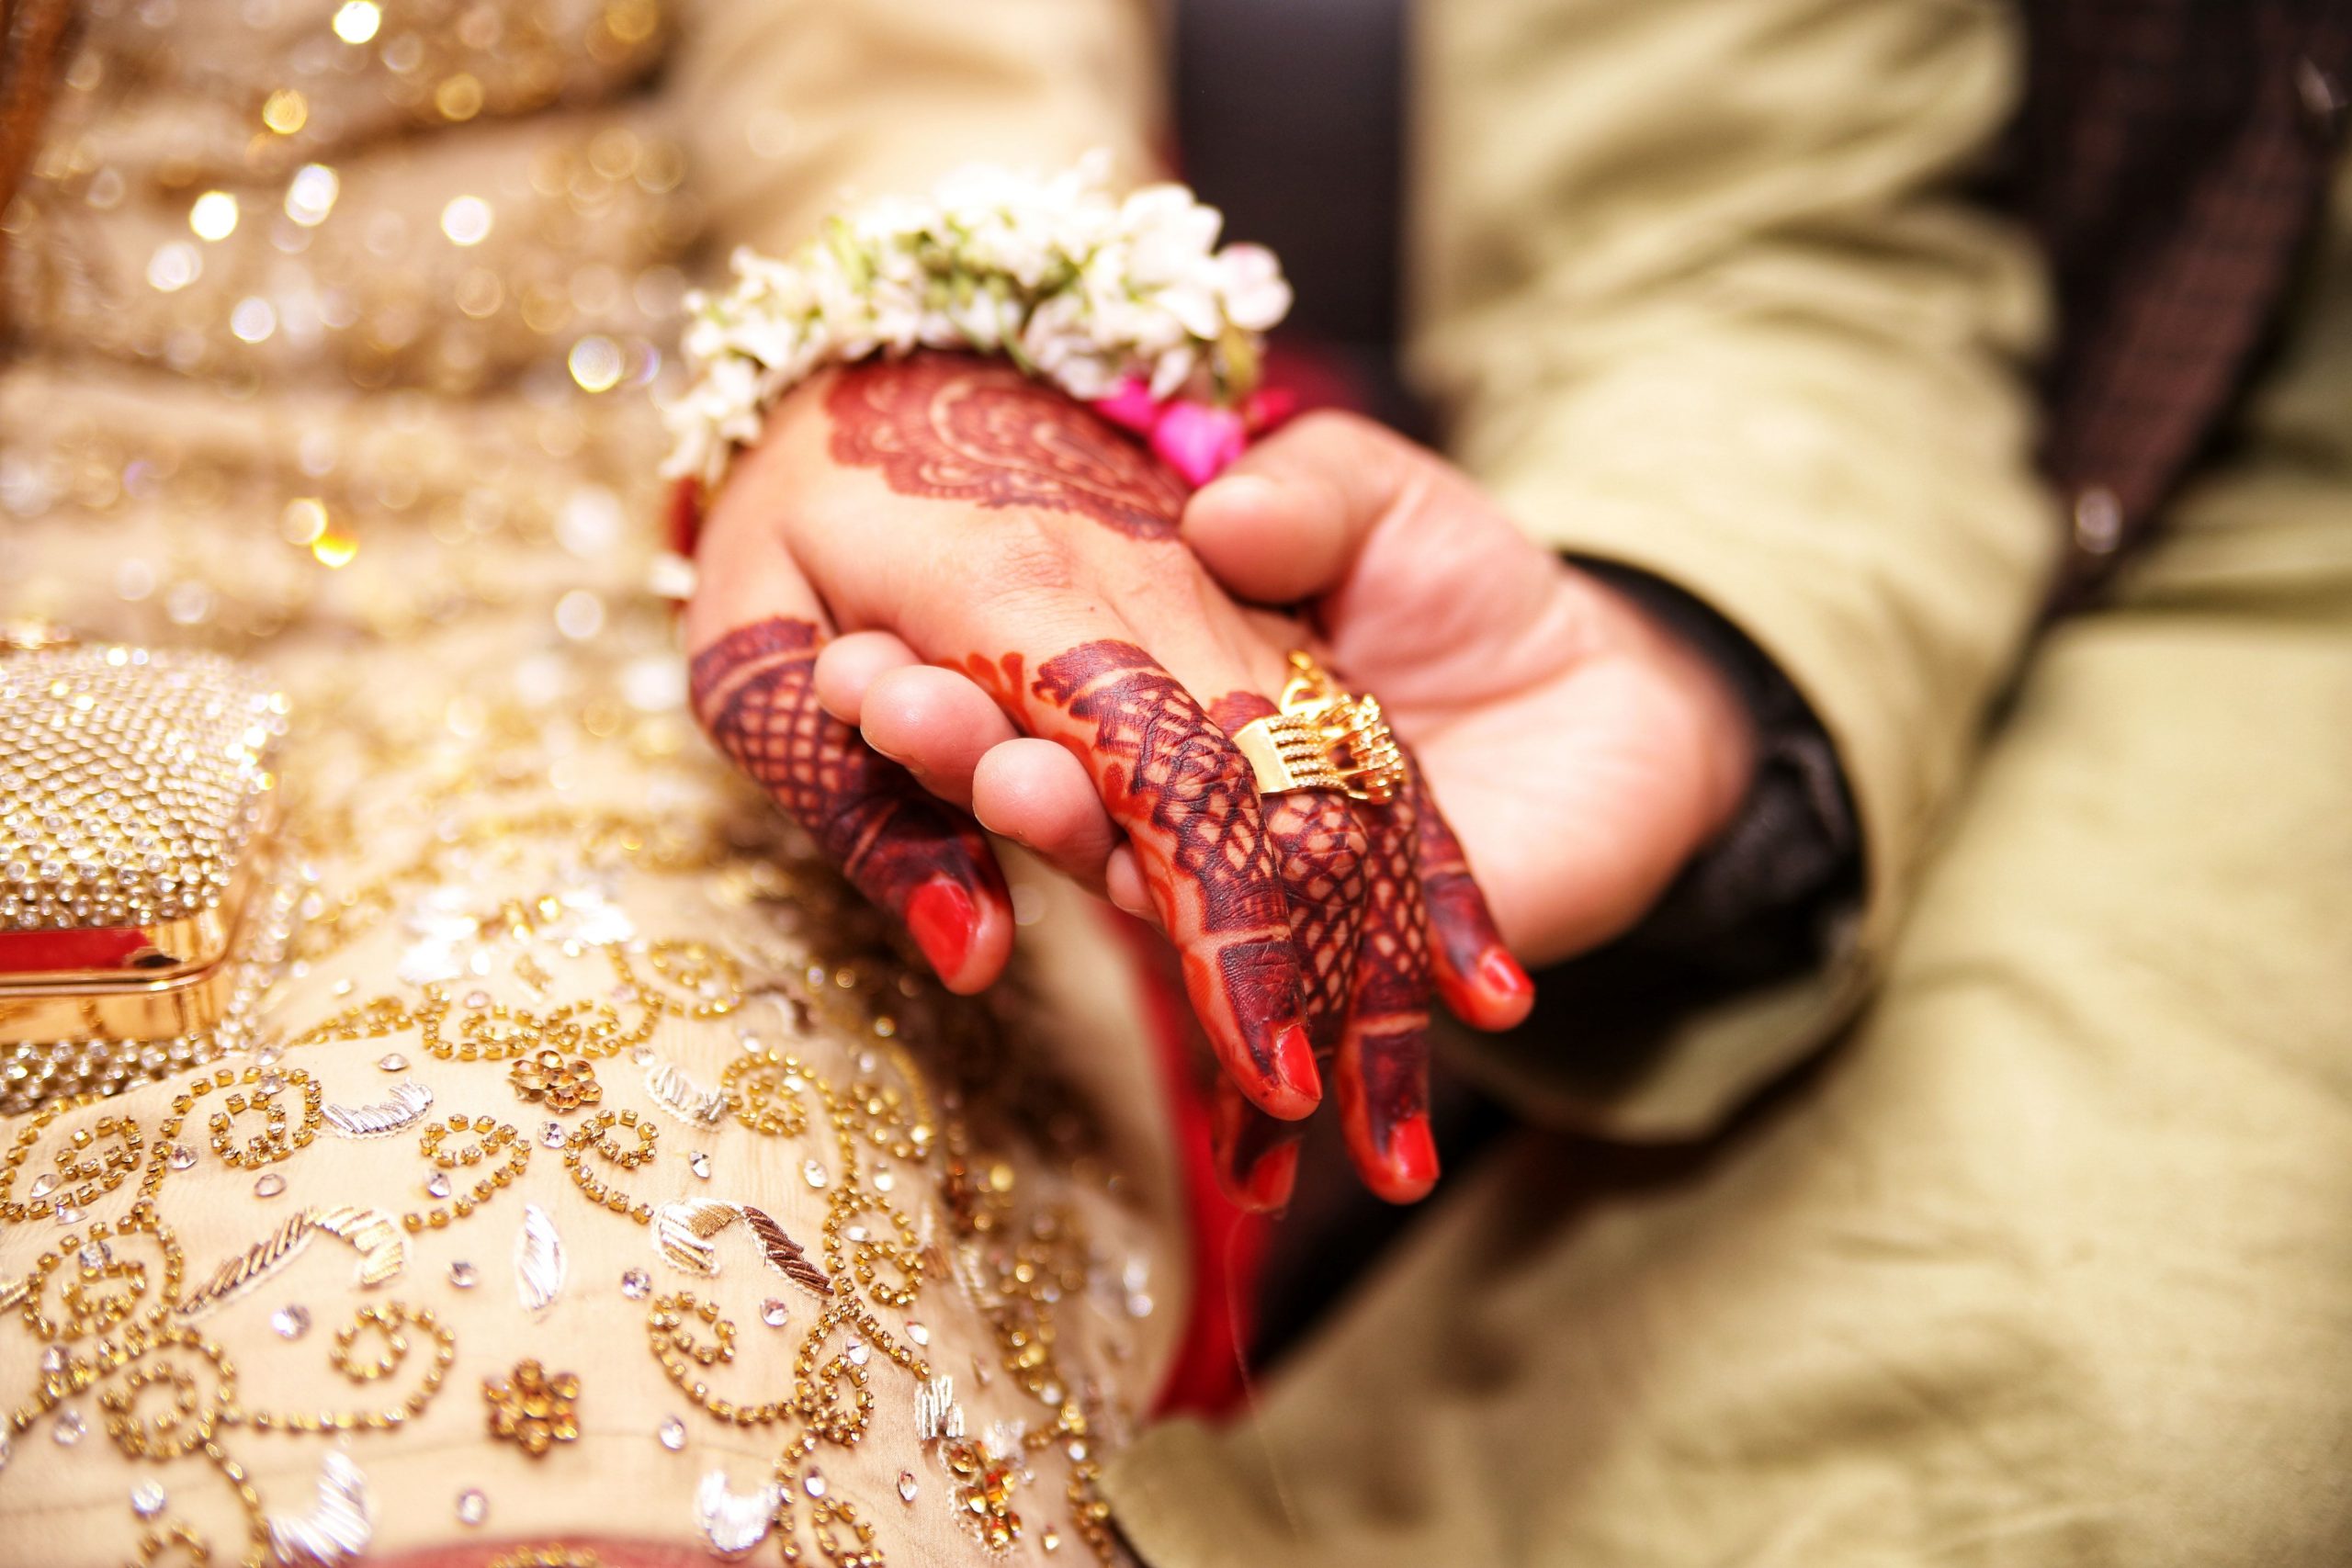 ‘Save me from an arranged marriage’: Man advertises himself to find a life partner